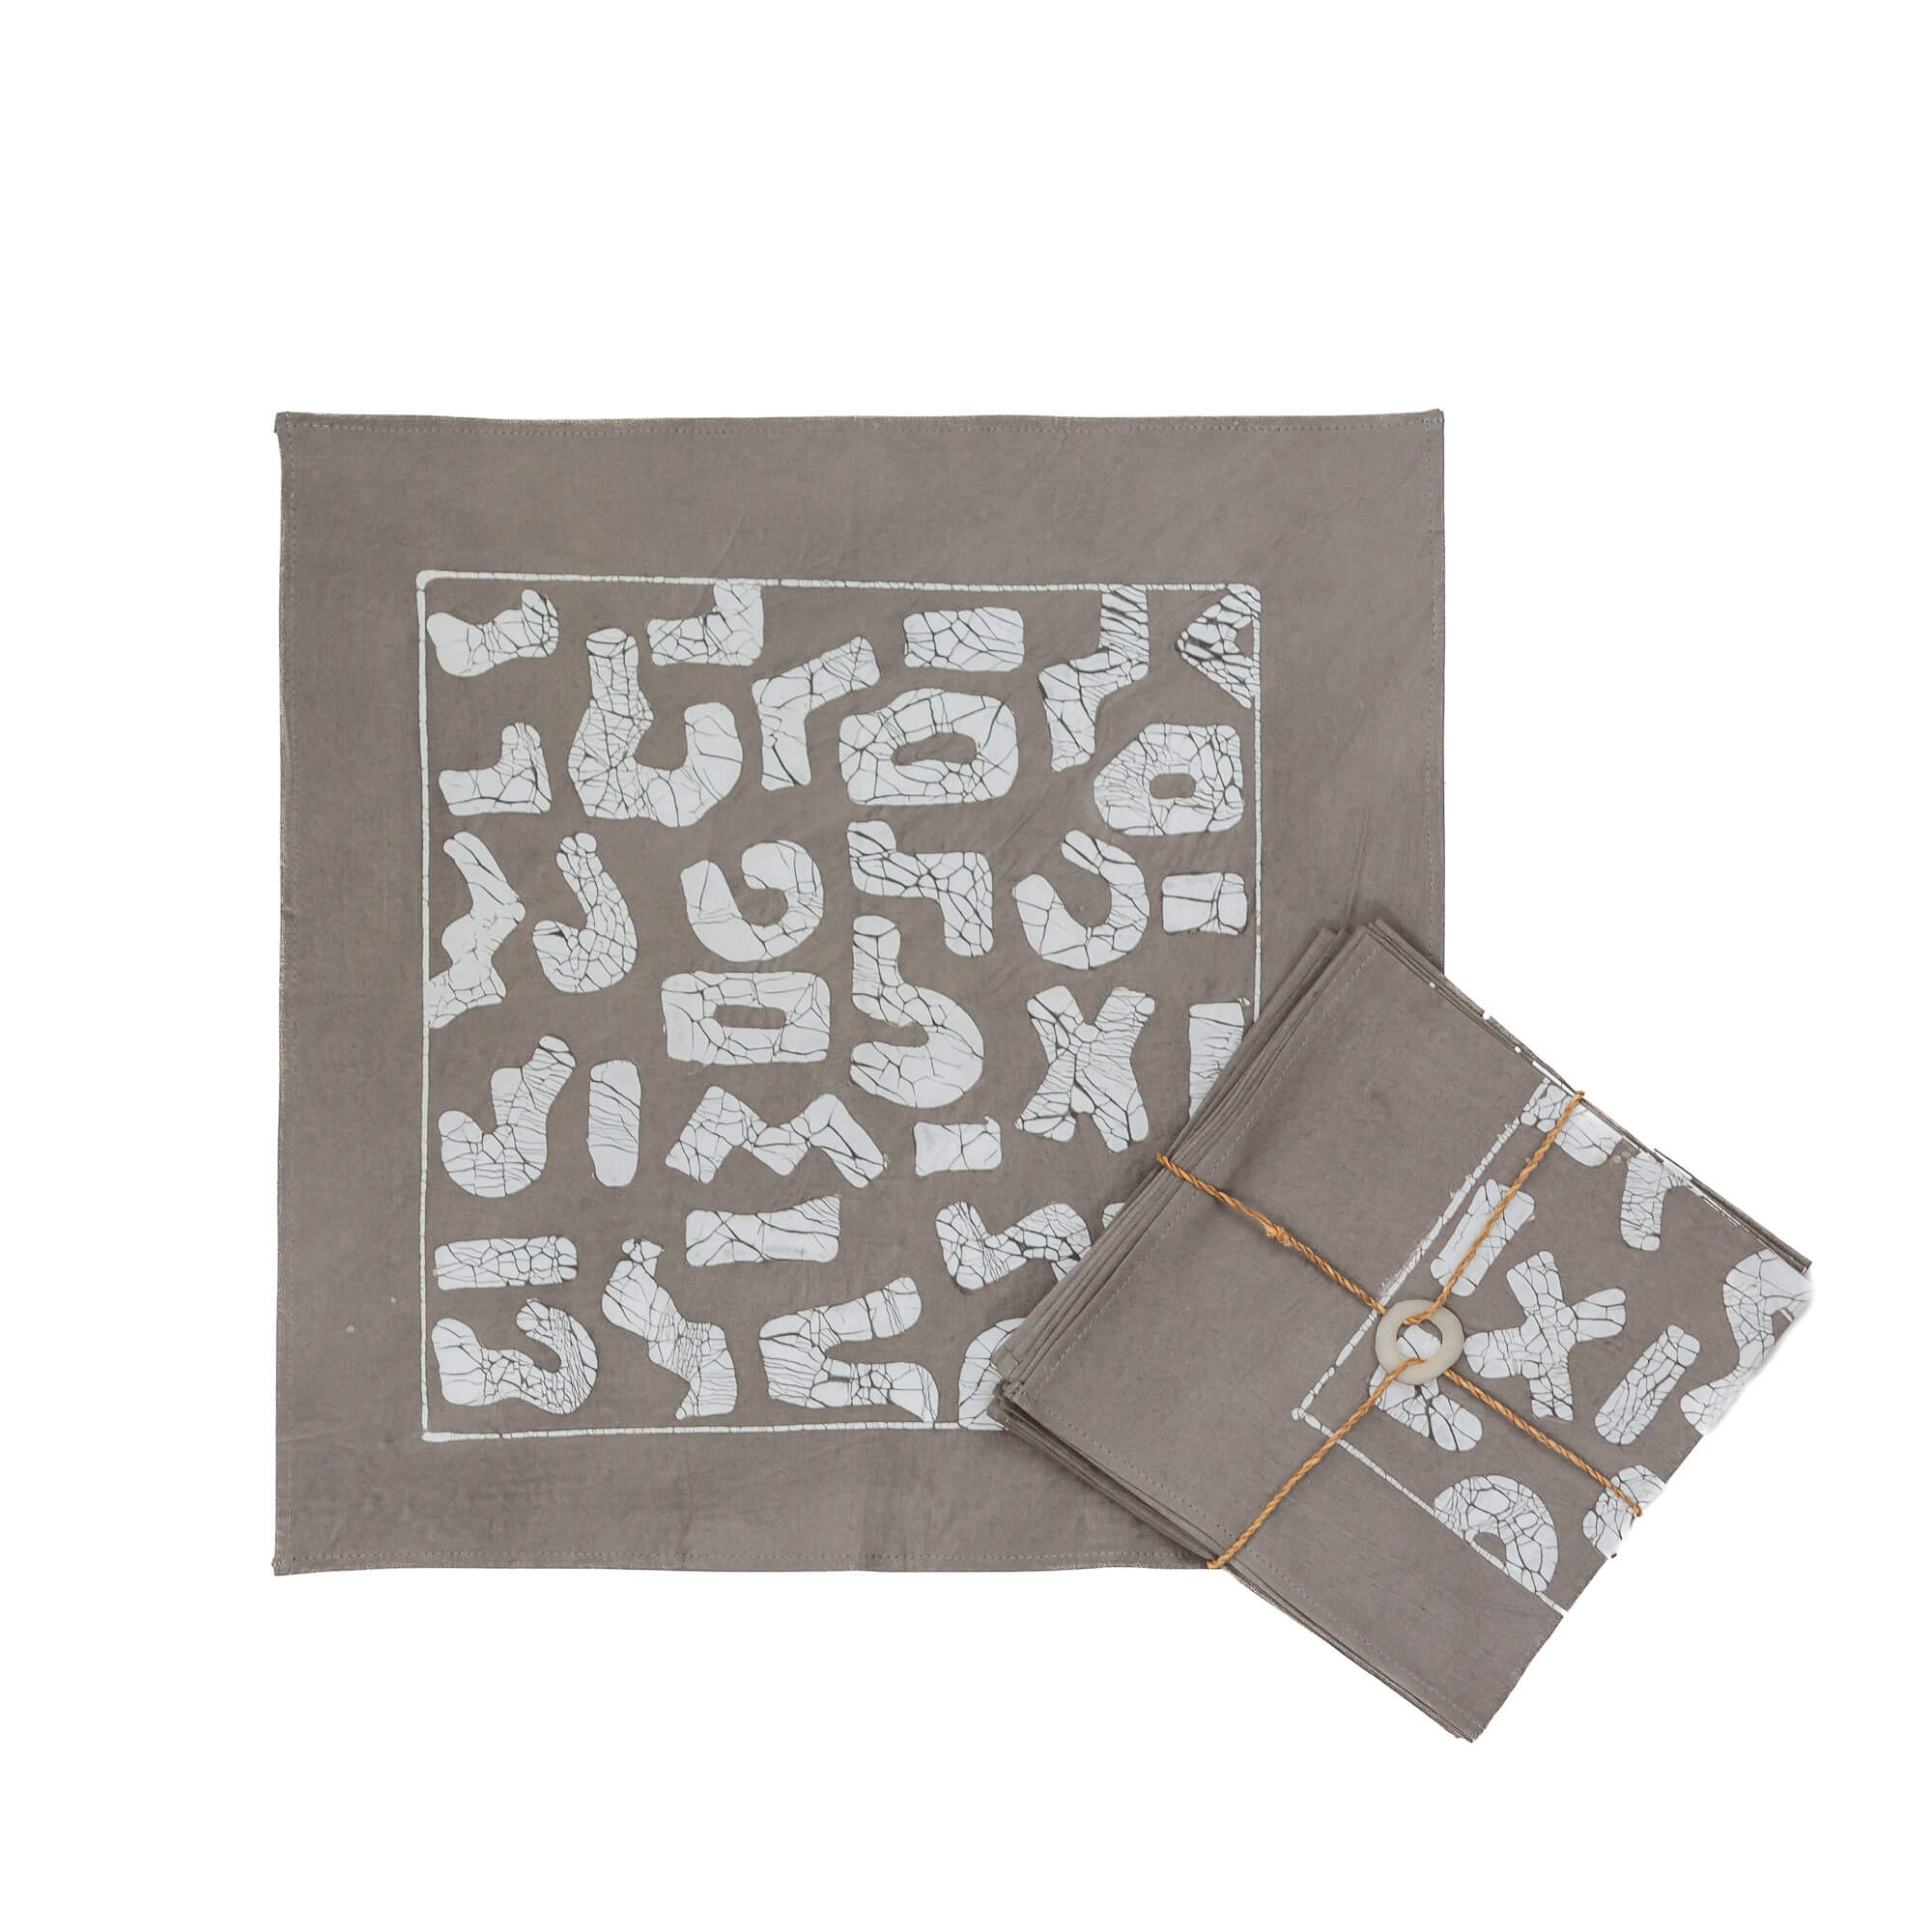 Kuba Dark Taupe Filled Napkin Set - Handmade by TRIBAL TEXTILES - Handcrafted Home Decor Interiors - African Made